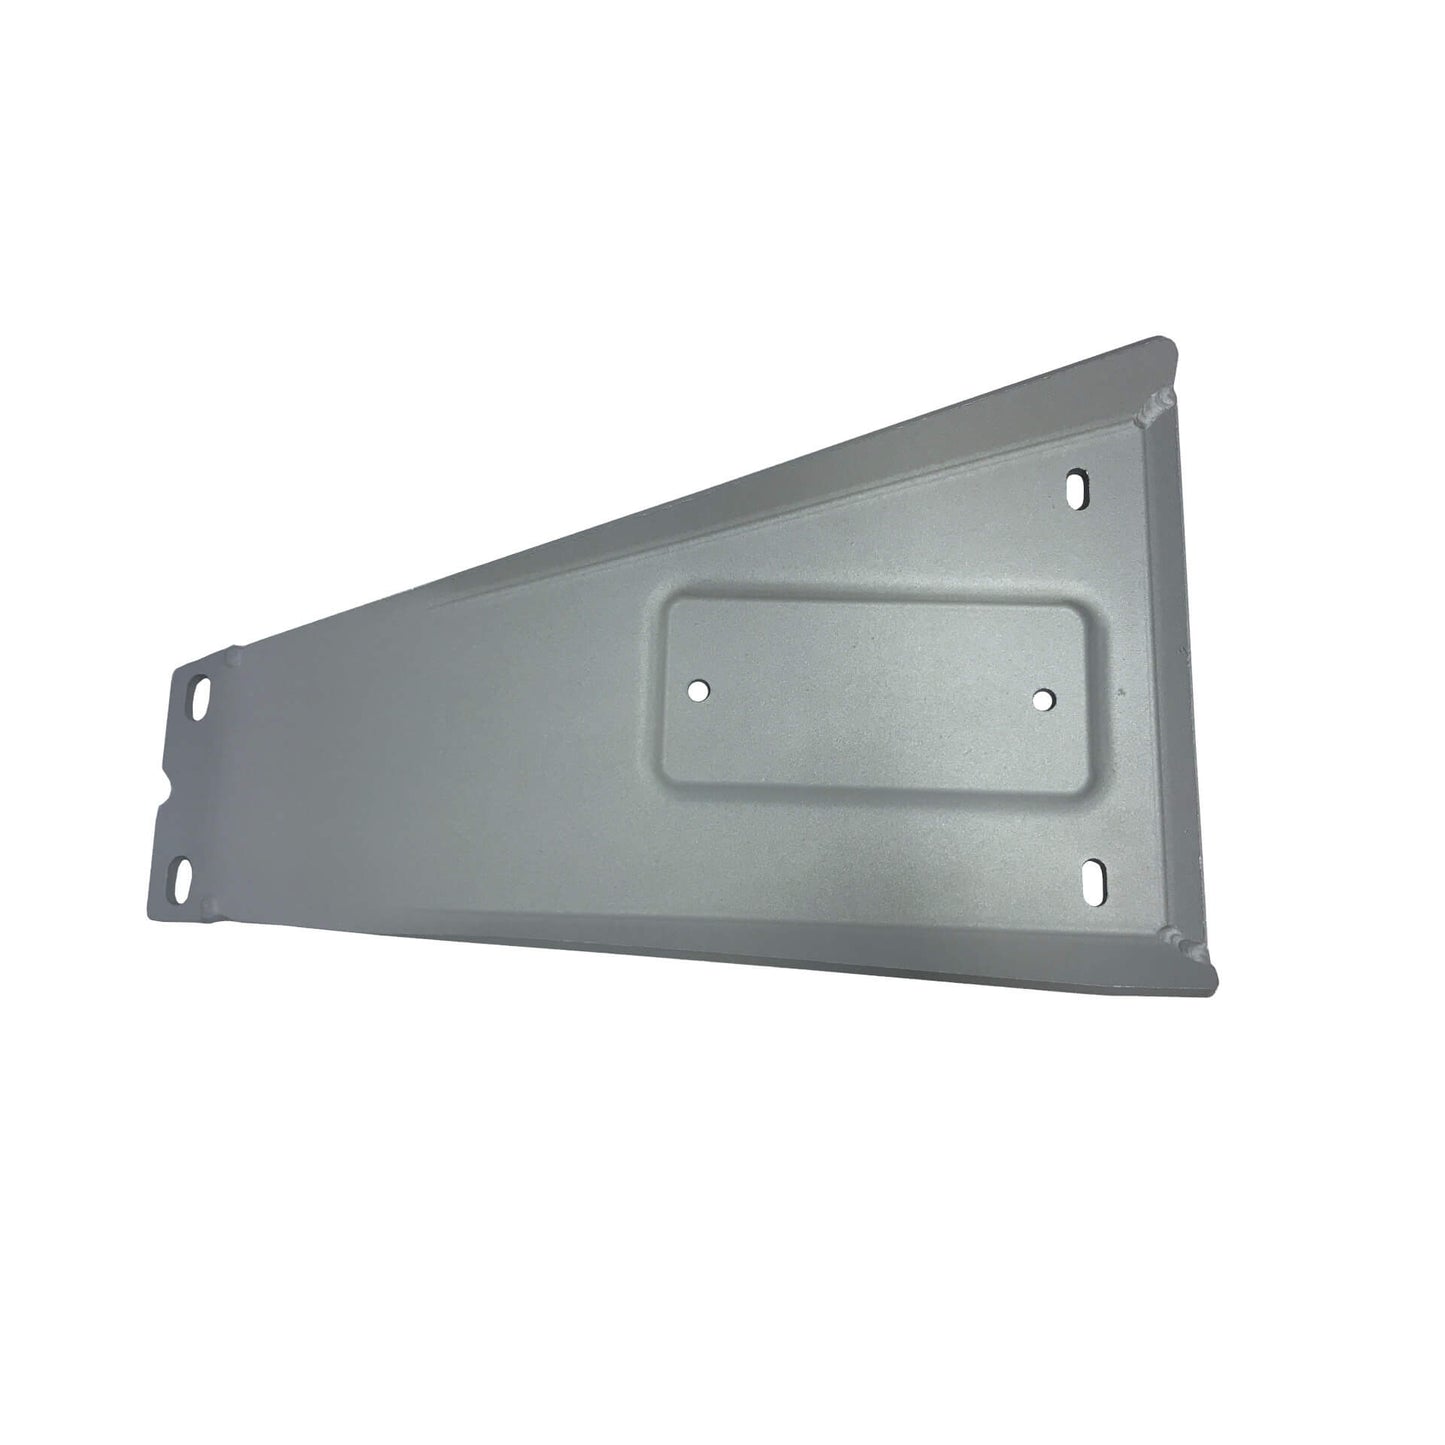 Euro6 Exhaust Underbody Skid Plates for Volkswagen Transporter T5 SWB -  - sold by Direct4x4